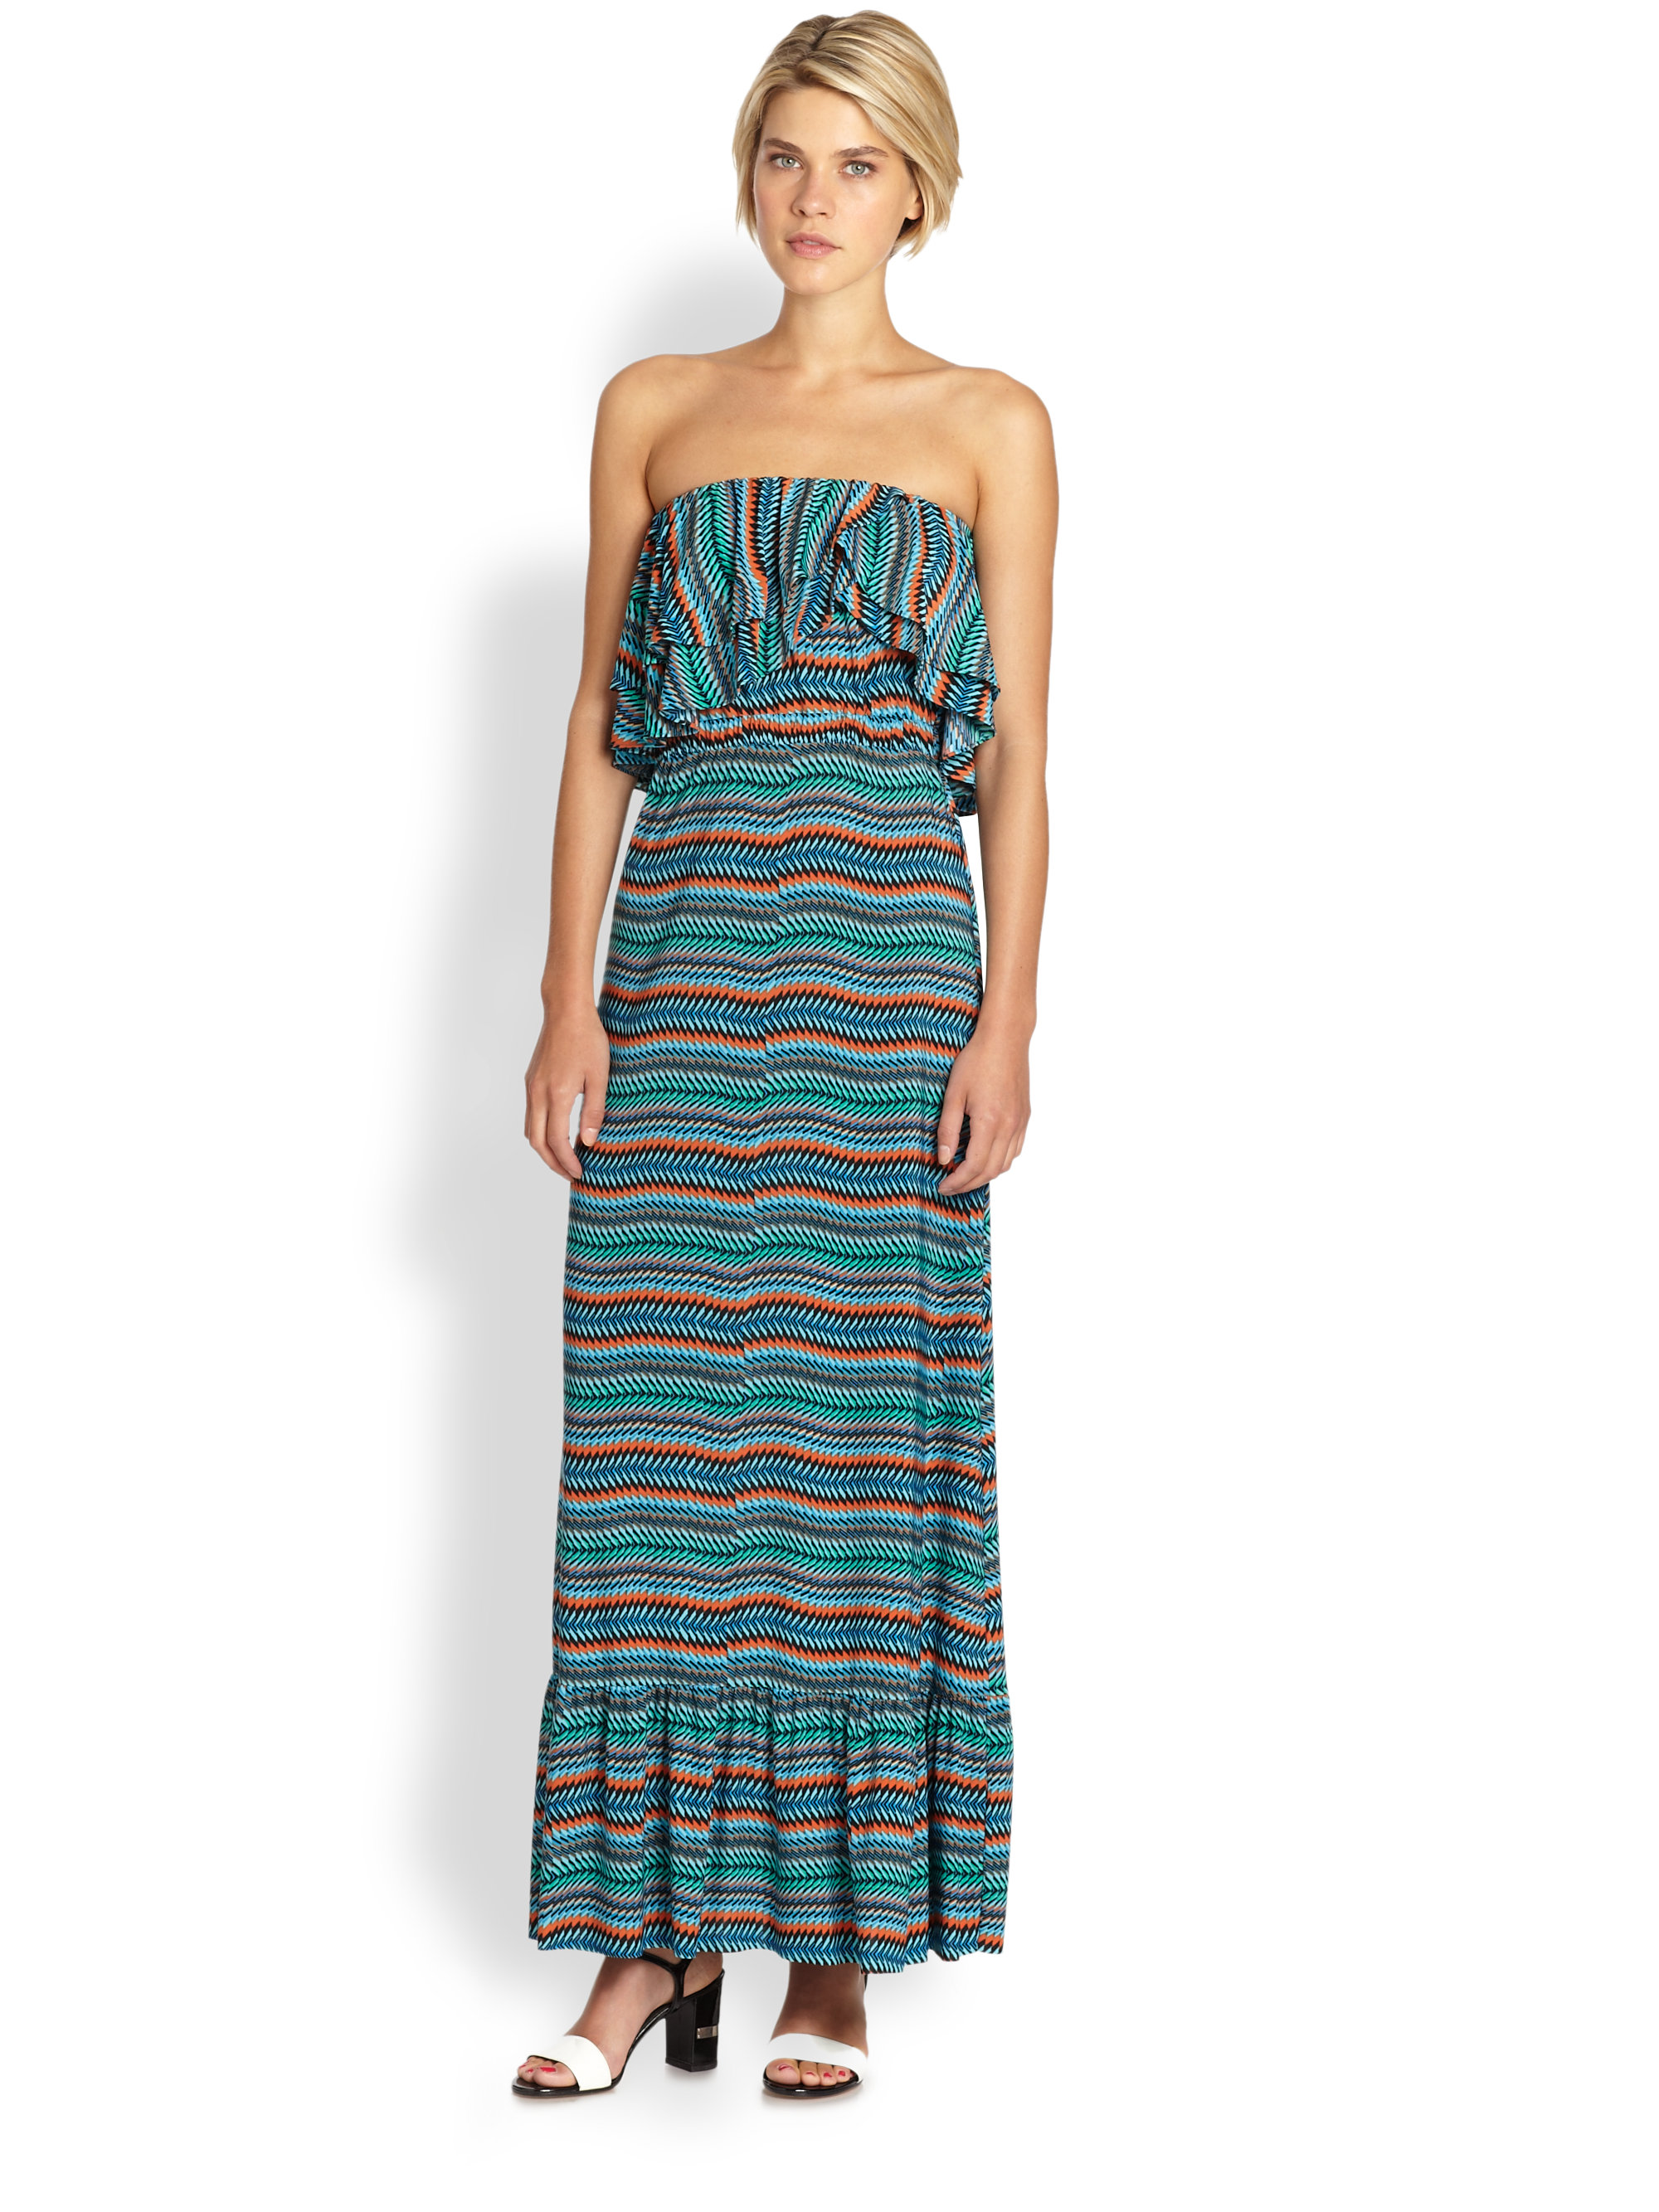 Lyst - T-Bags Strapless Ruffle Maxi Dress in Blue